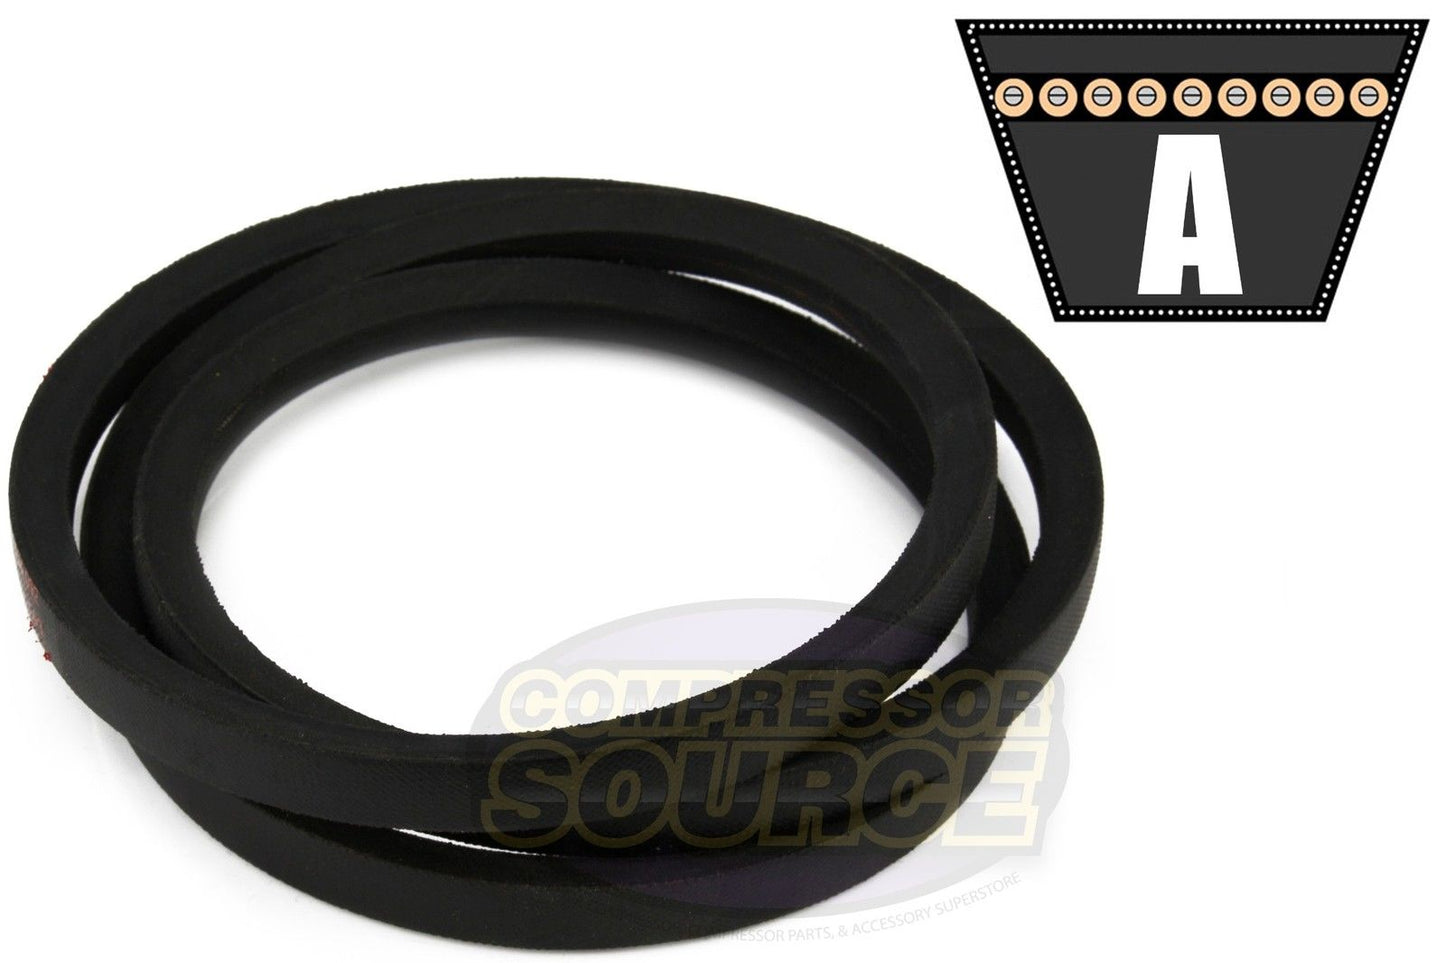 A54 Industrial & Lawn Mower 1/2" x 56" V Belt 4L560 Replacement High Quality